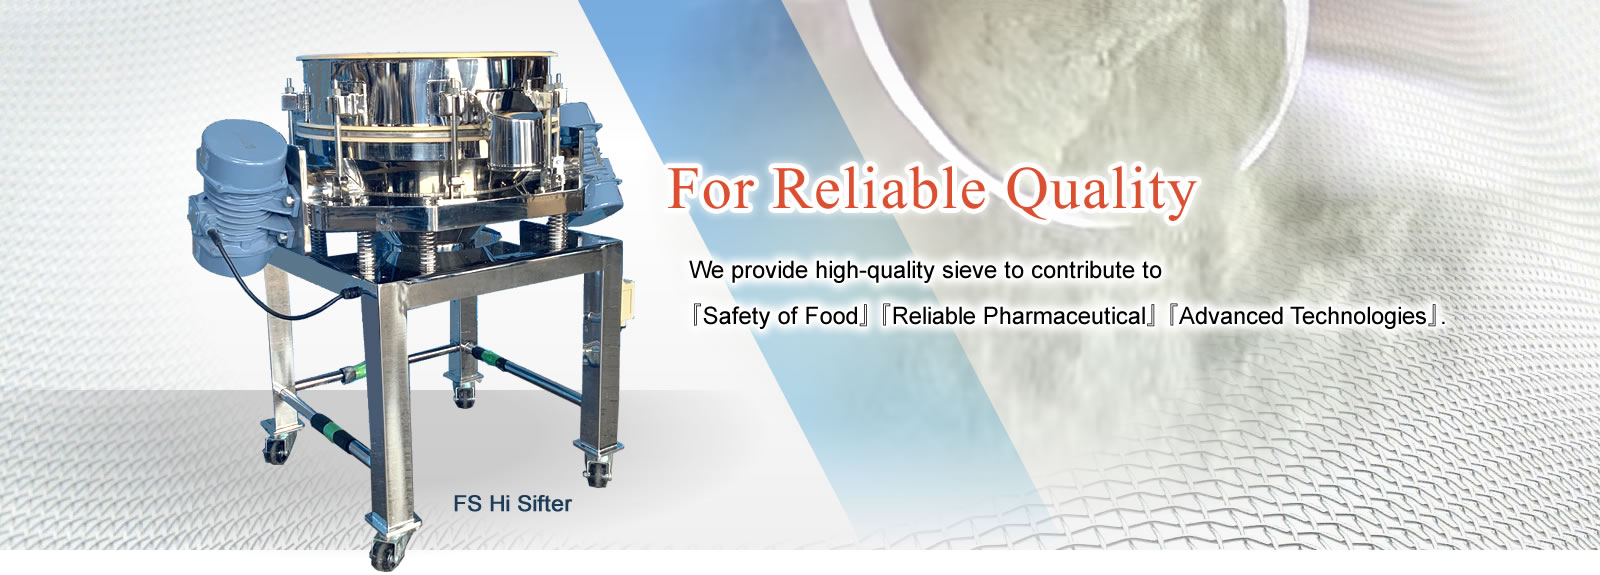 For Reliable Quality 